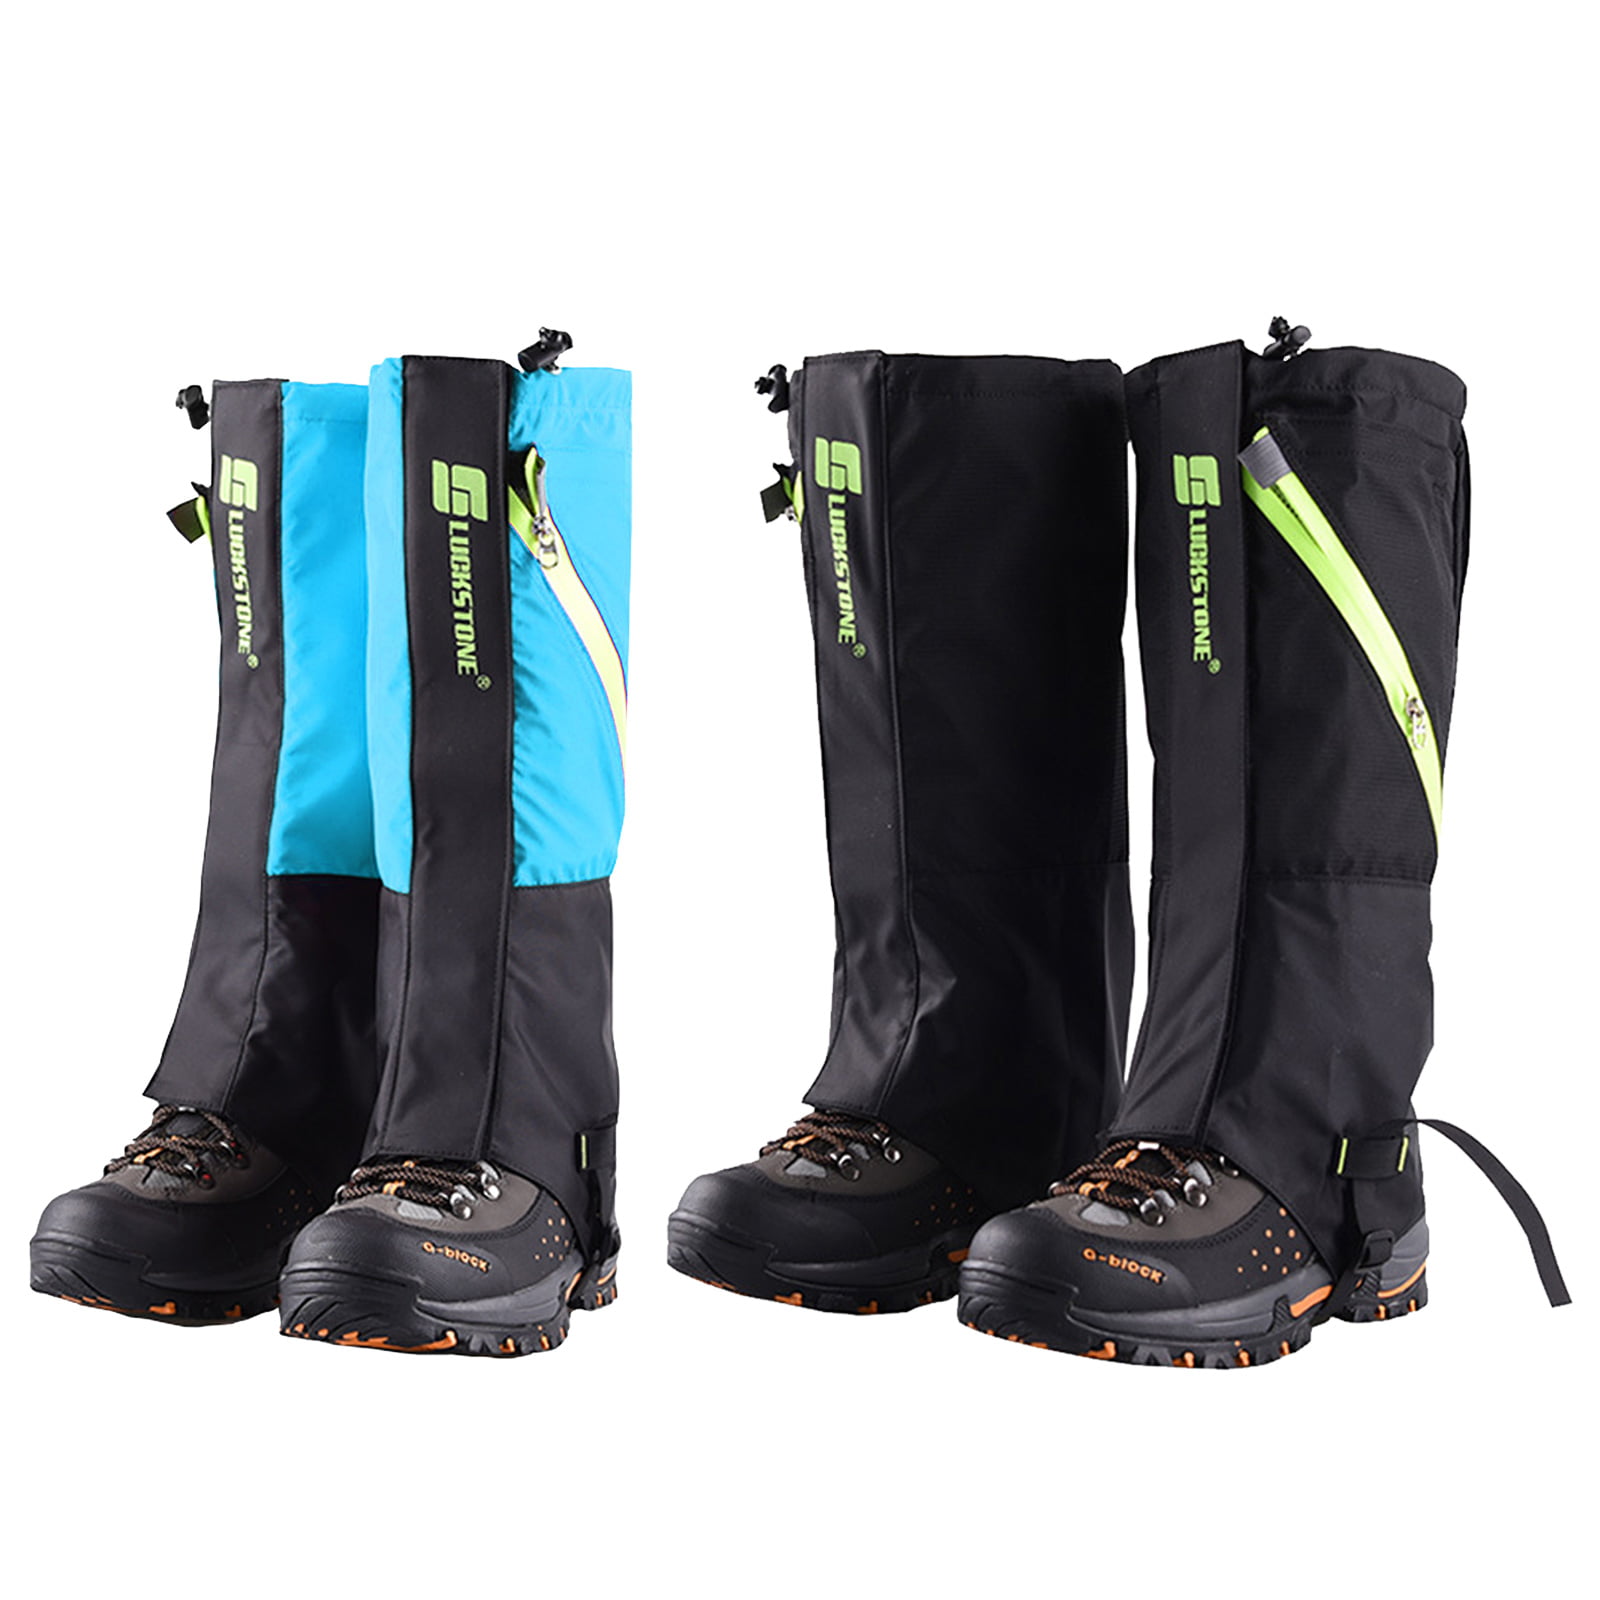 New Outdoor Hiking Boots Cover Gaiters Waterproof Protection Snake Snow Legging 